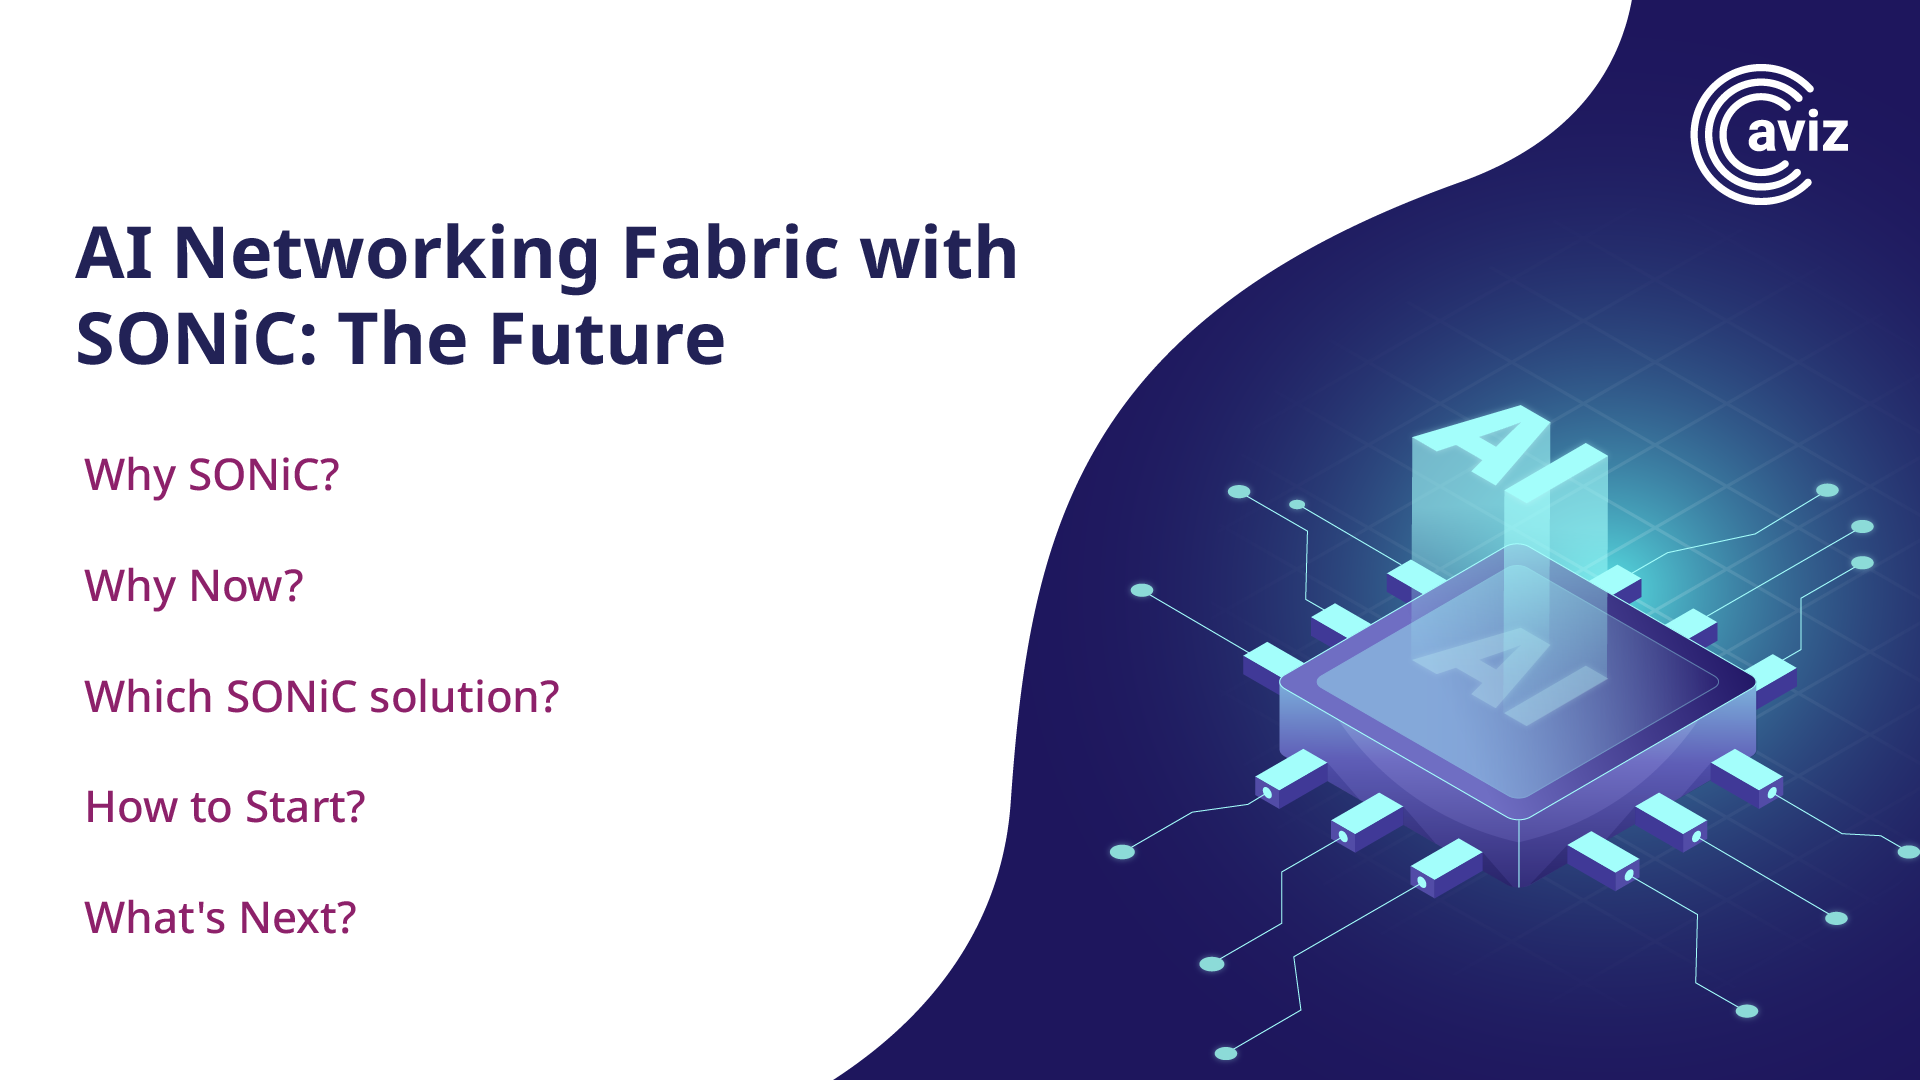 AI Networking Fabric with SONiC: The Future